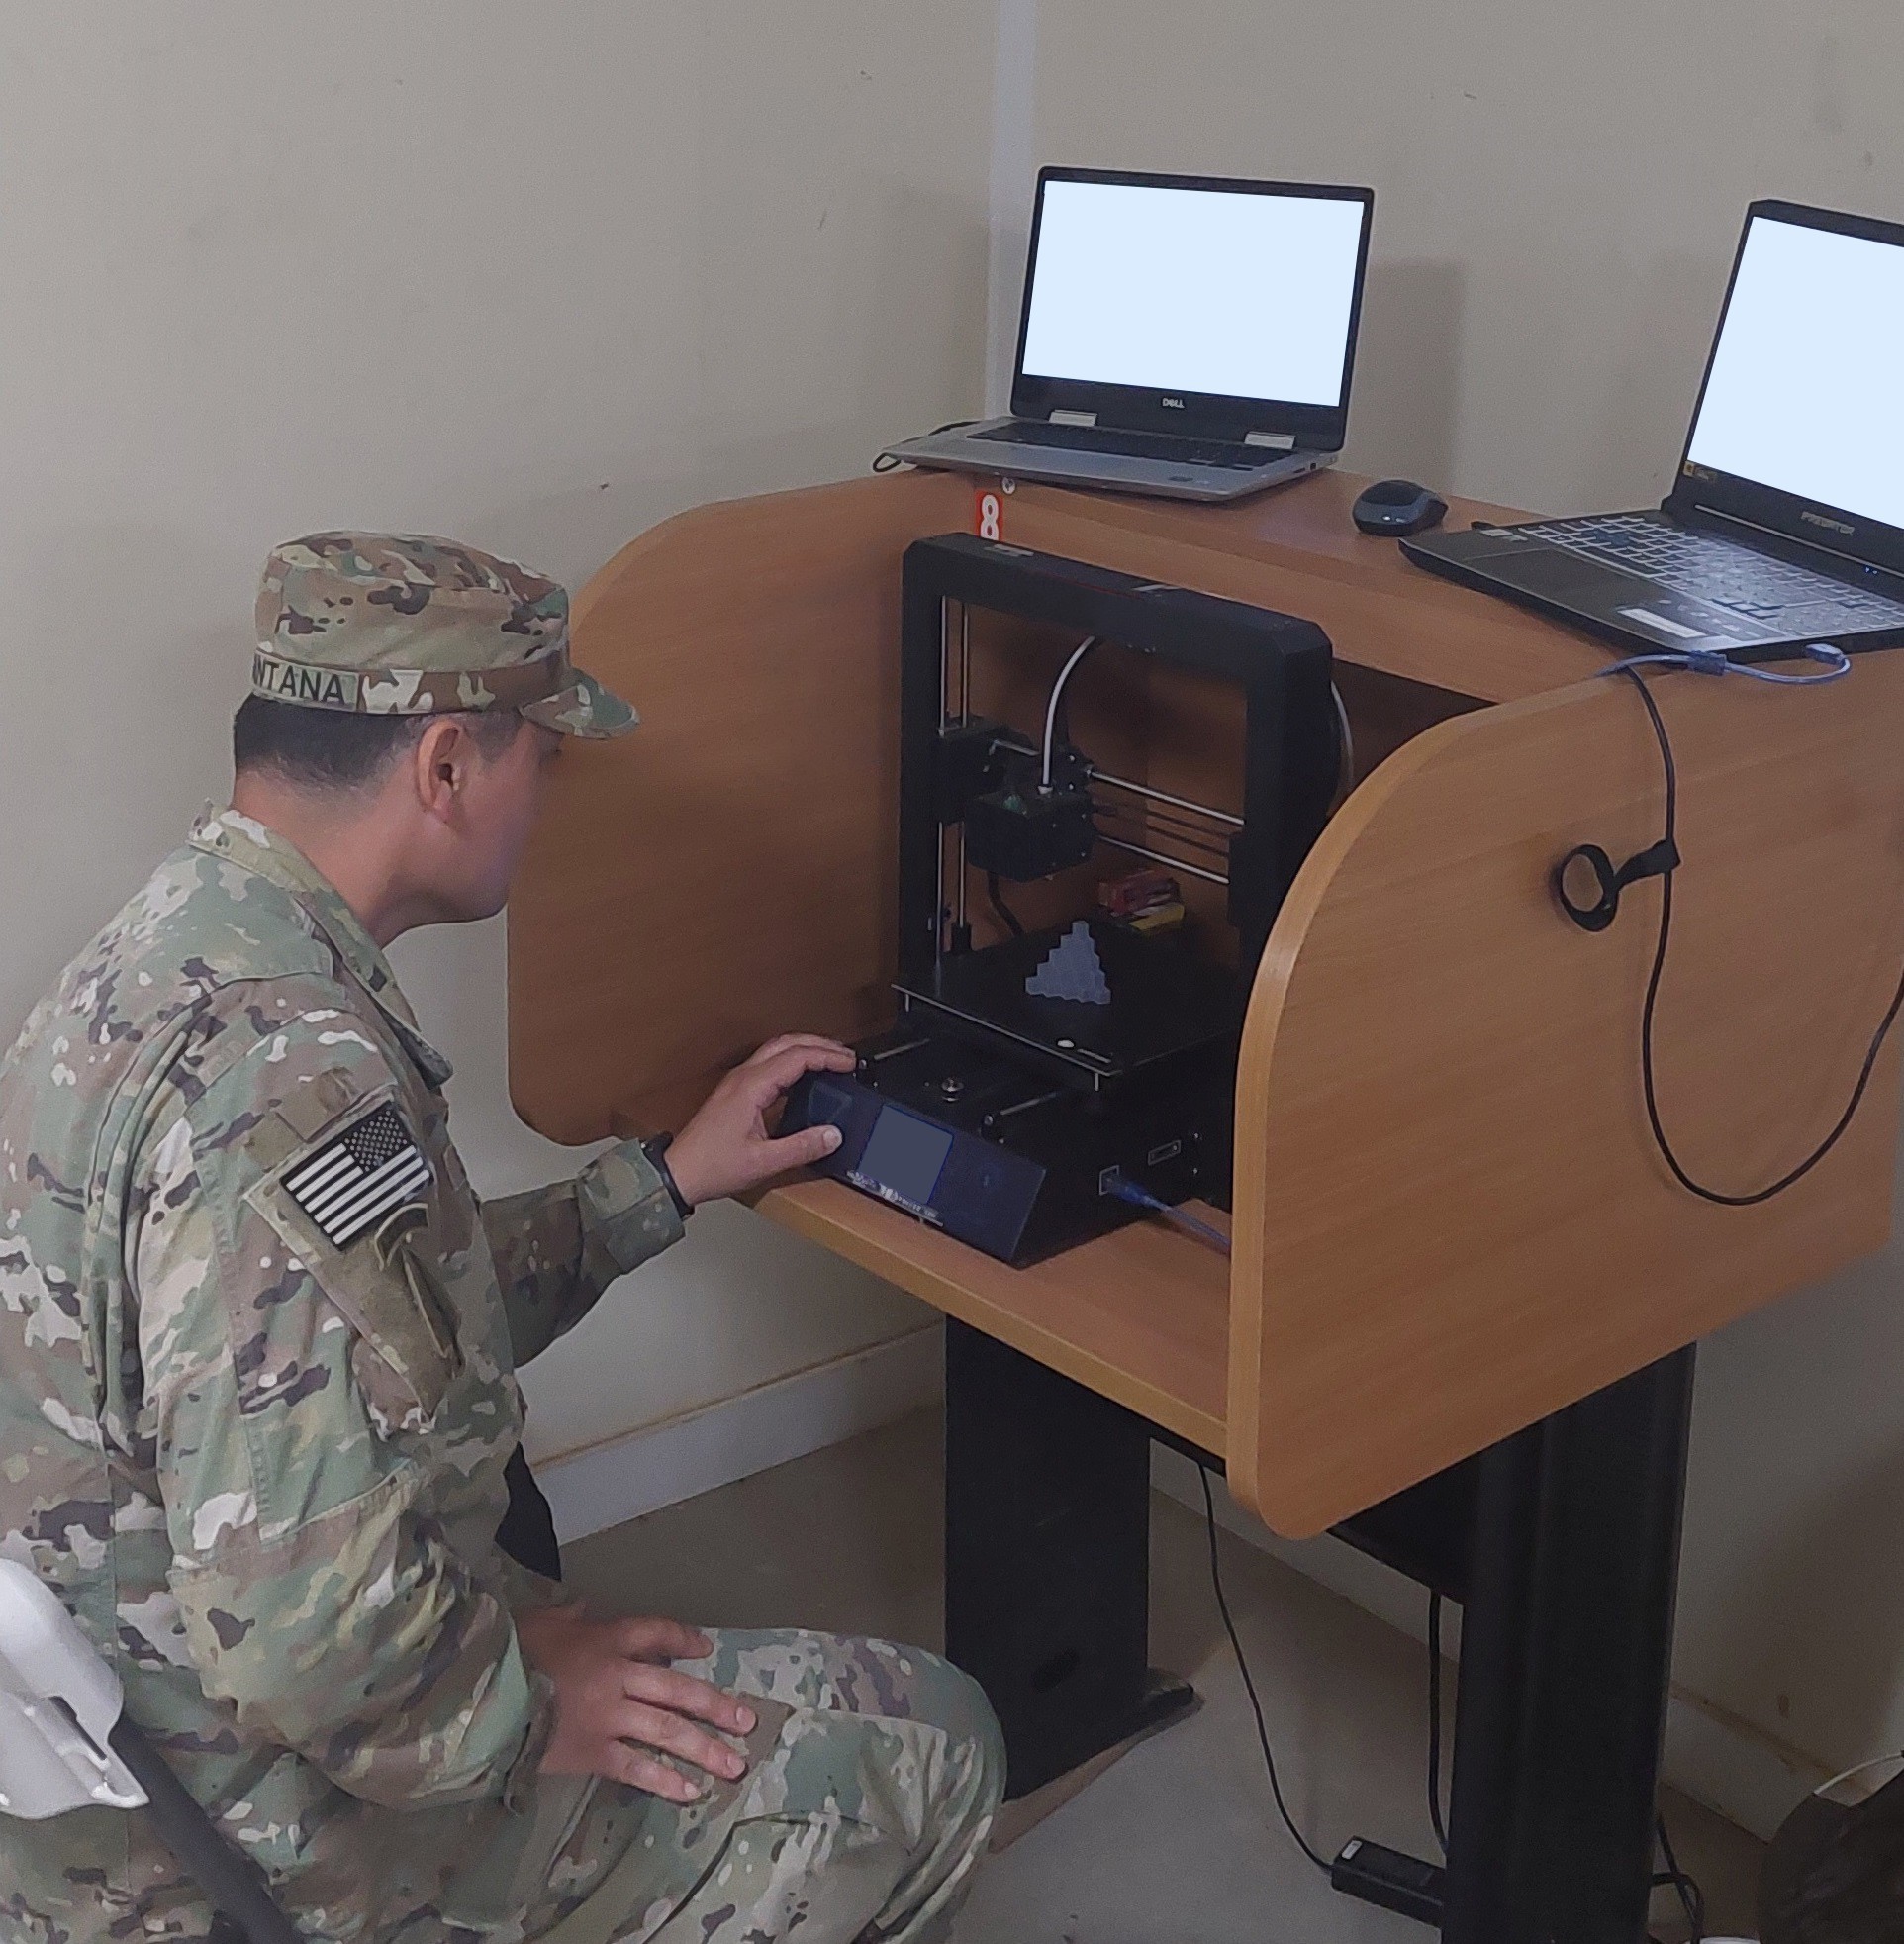 Soldiers from 7th SFG(A) tested the technology by repeatedly adding and printing additive manufacturing files using Defend3D's VICI.  Photo via US Army.